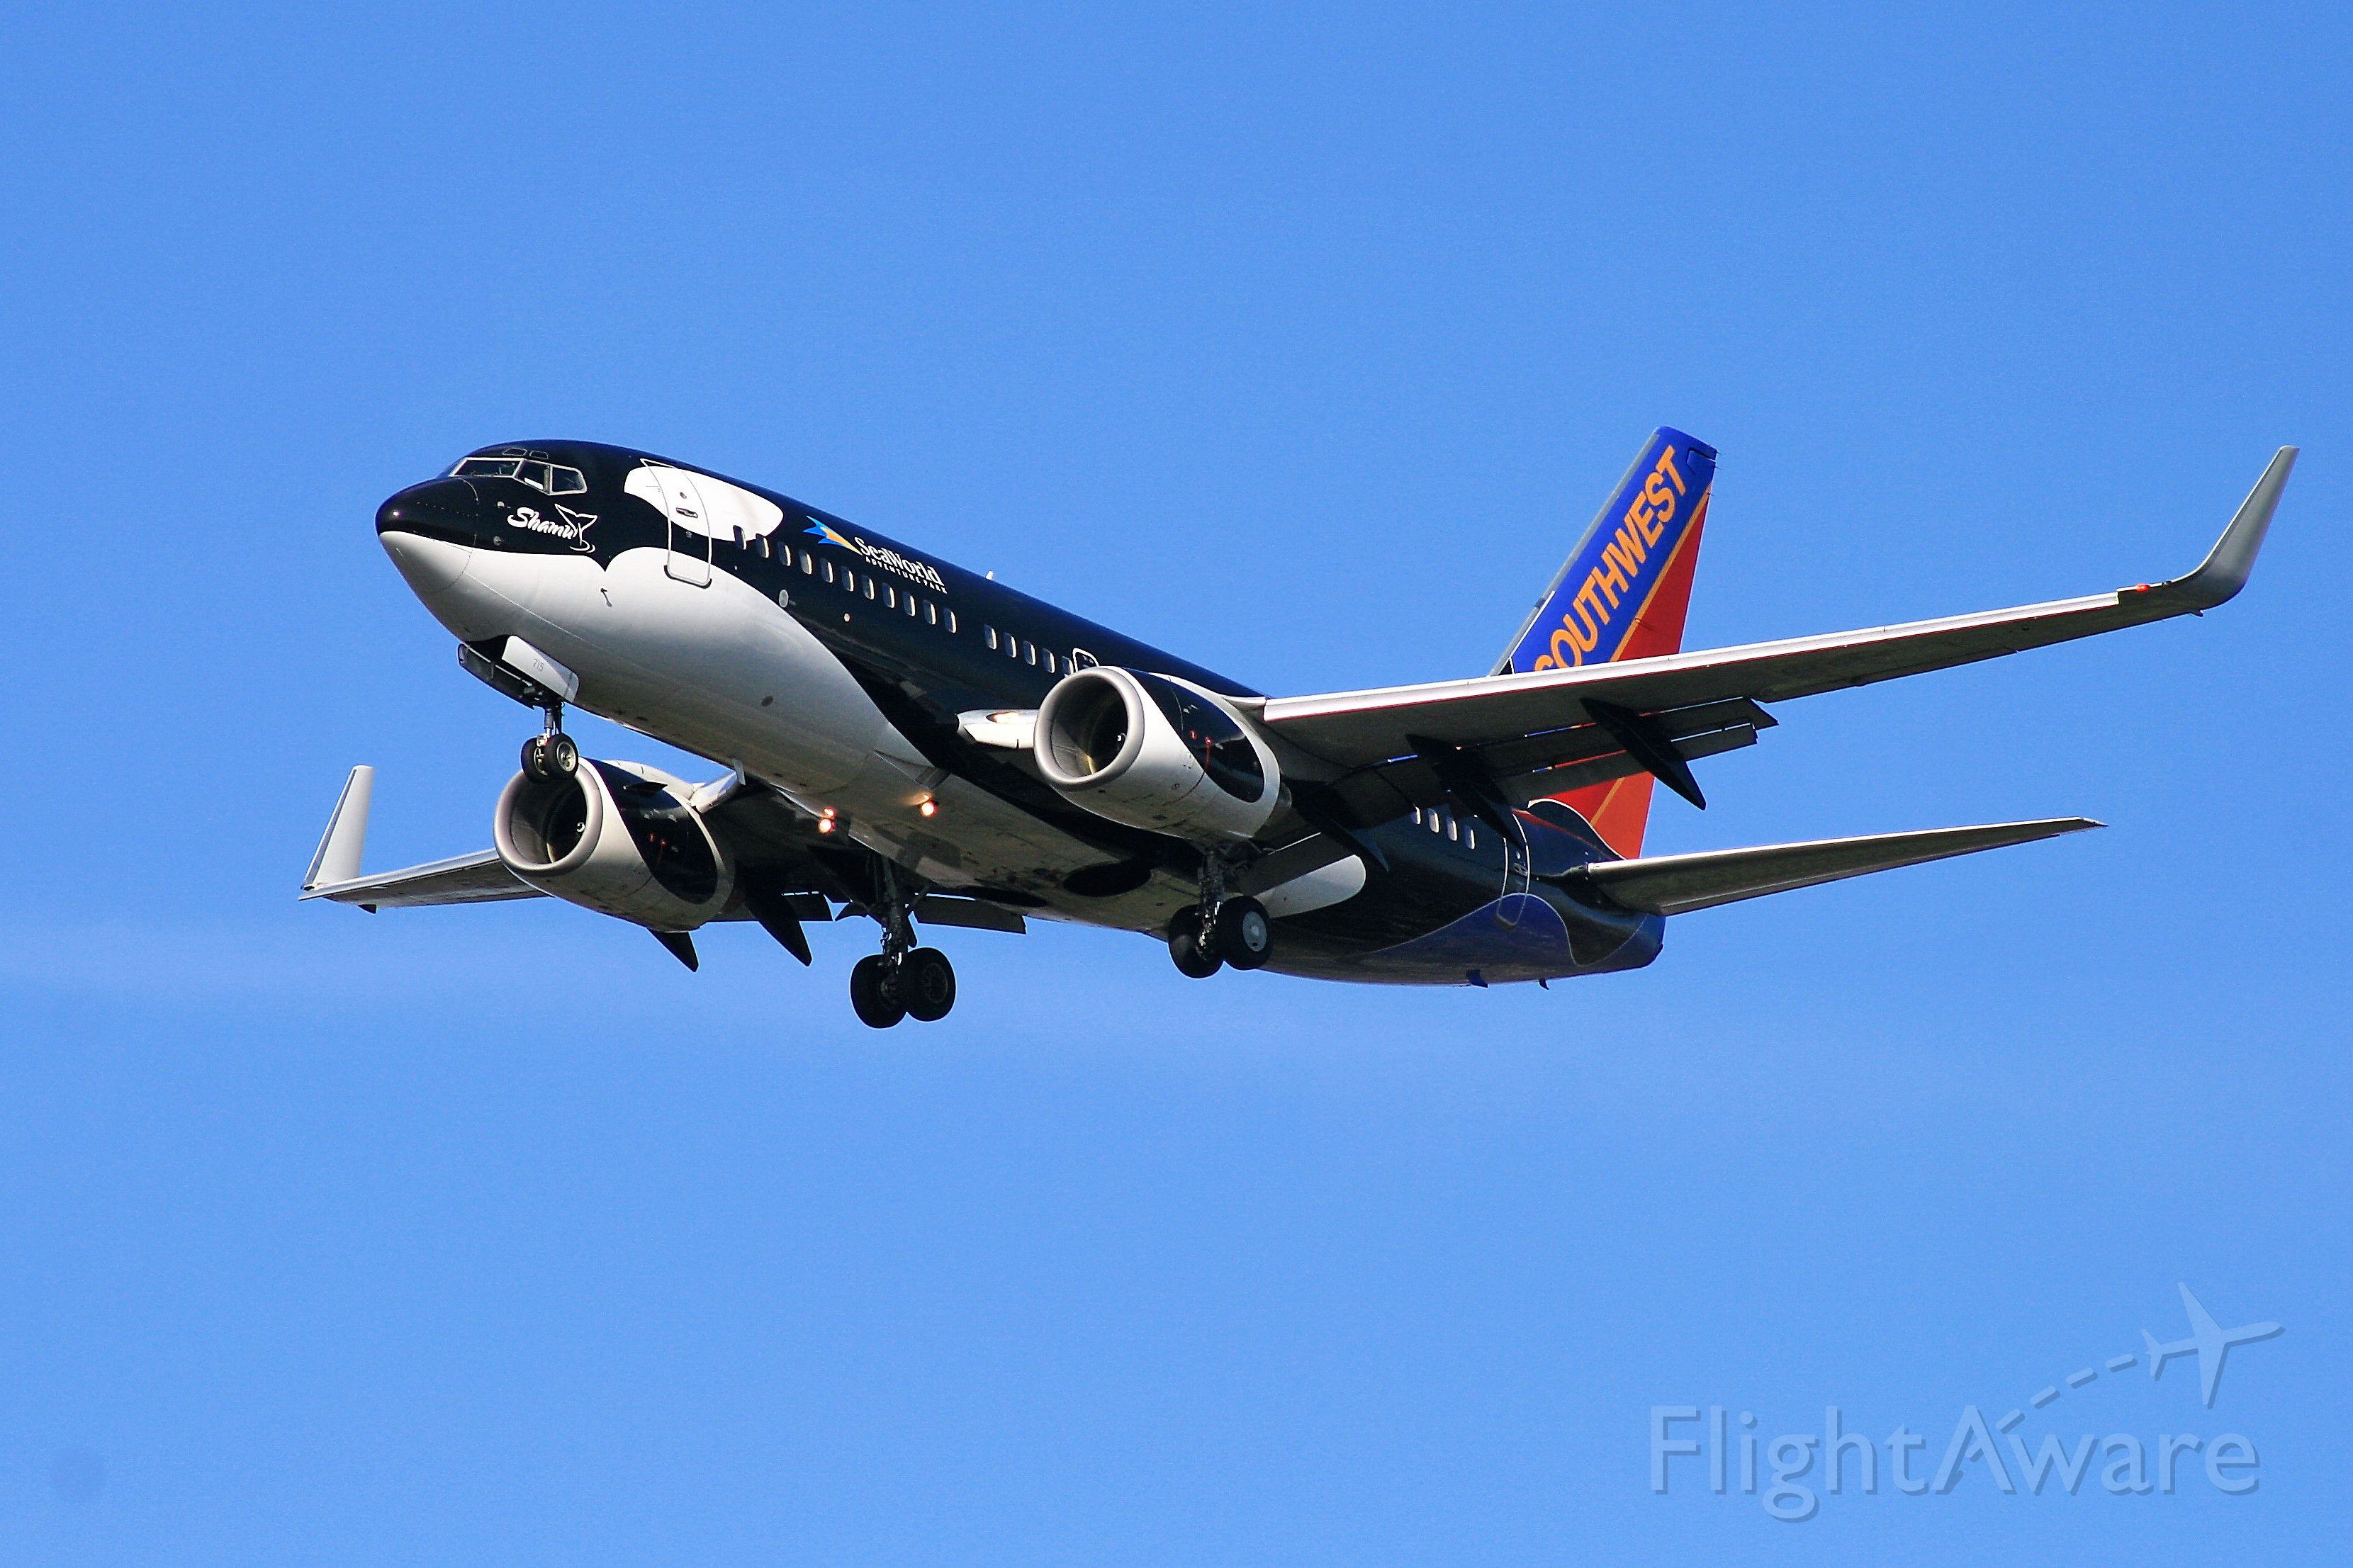 Boeing 737-700 (N715SW) - On final approach to runway 21R at Nashville